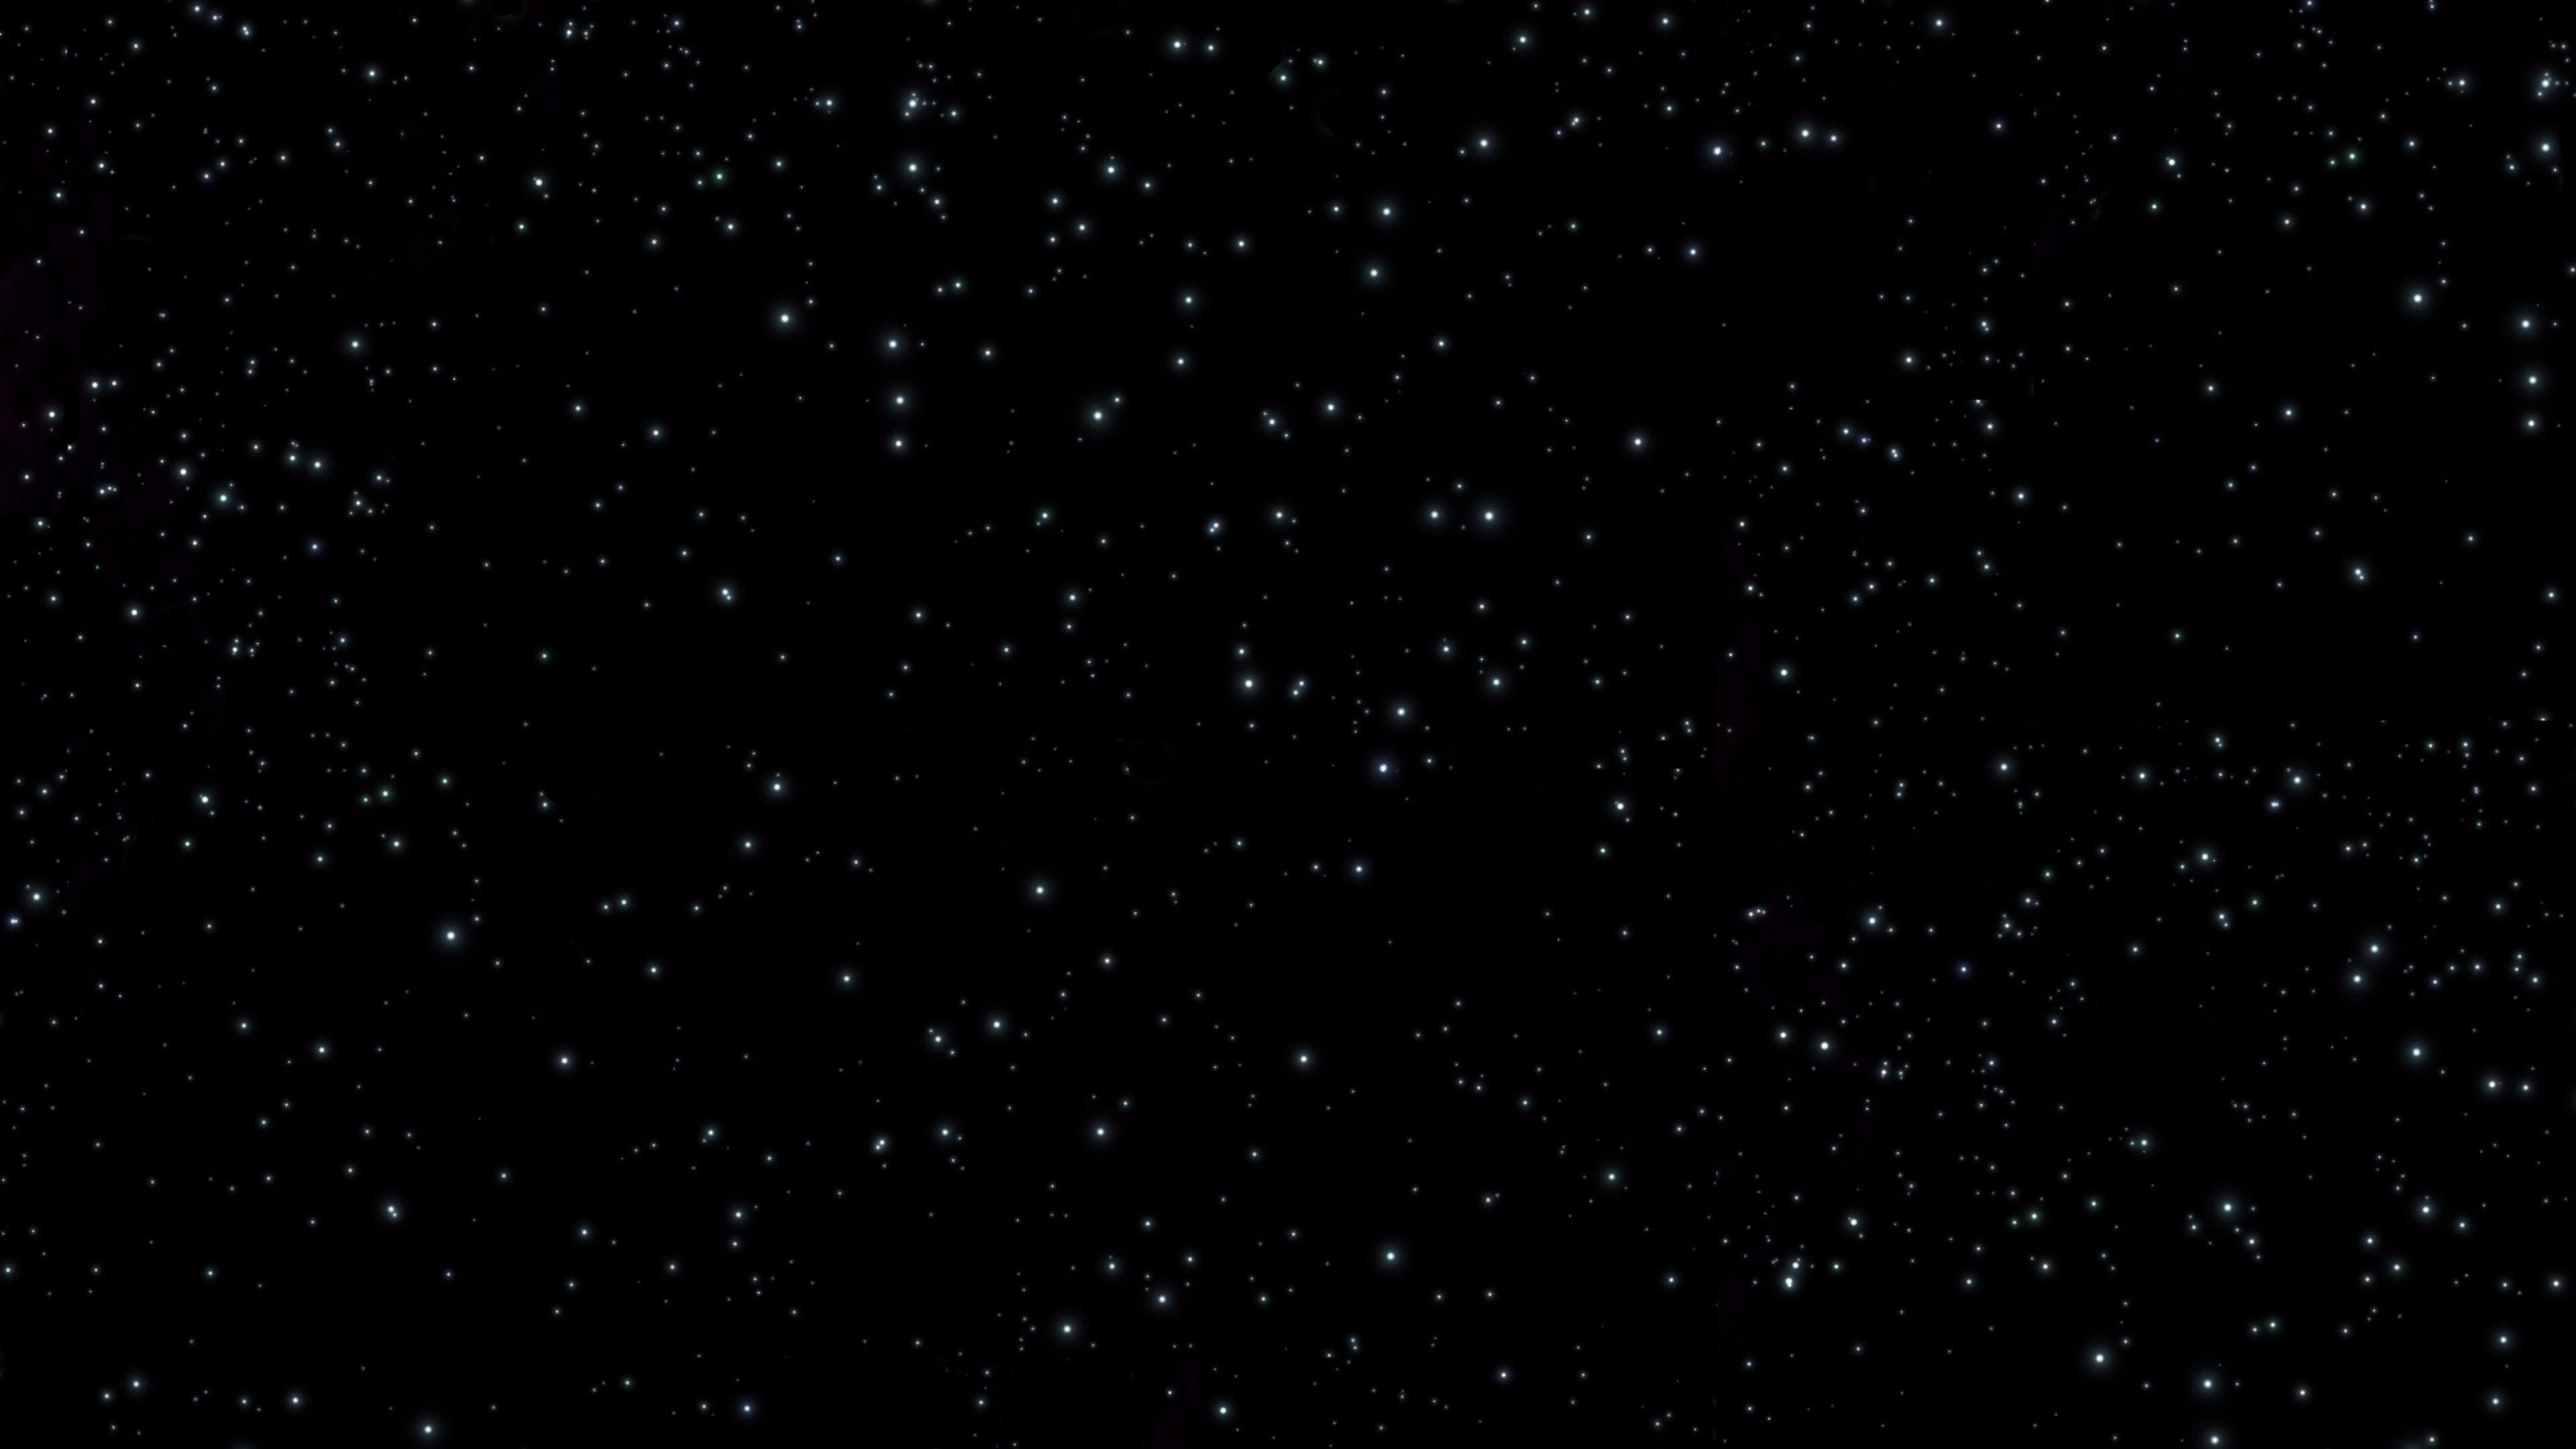 A black sky with stars and some clouds - Space